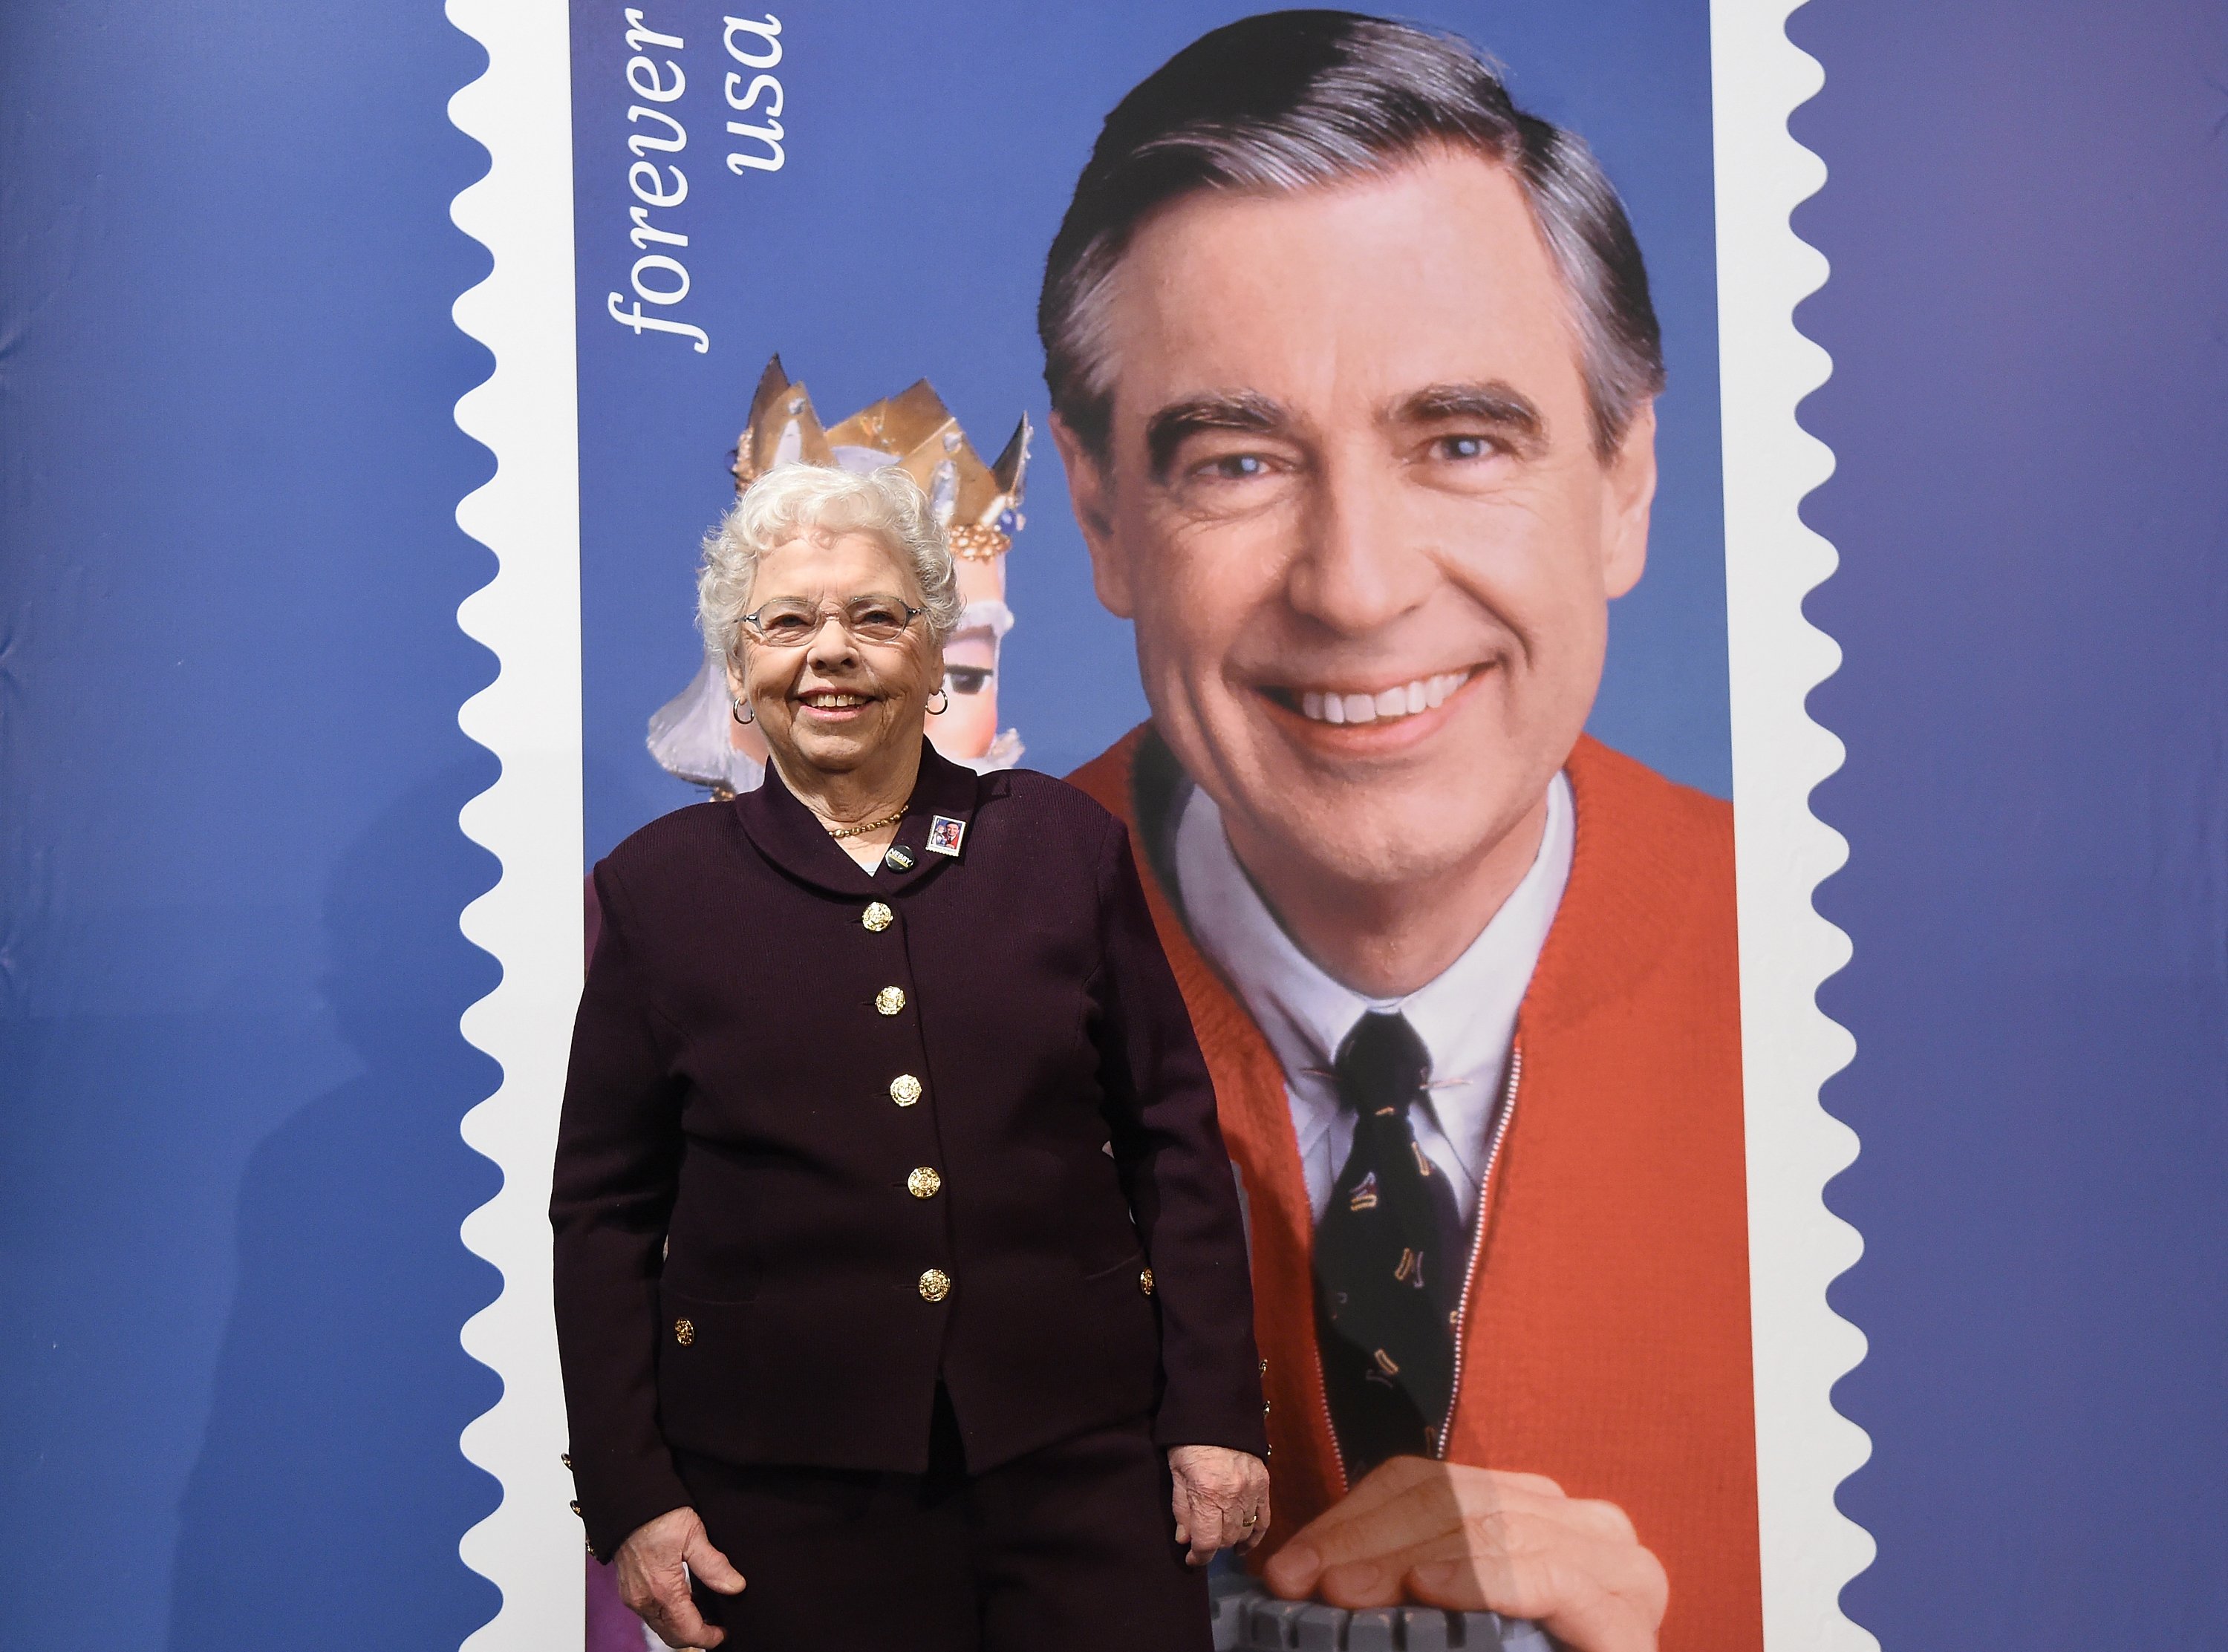 Joanne Rogers attends the event for Misters Rogers Forever Stamp in Pittsburgh, Pennsylvania on March 23, 2018 | Photo: Getty Images